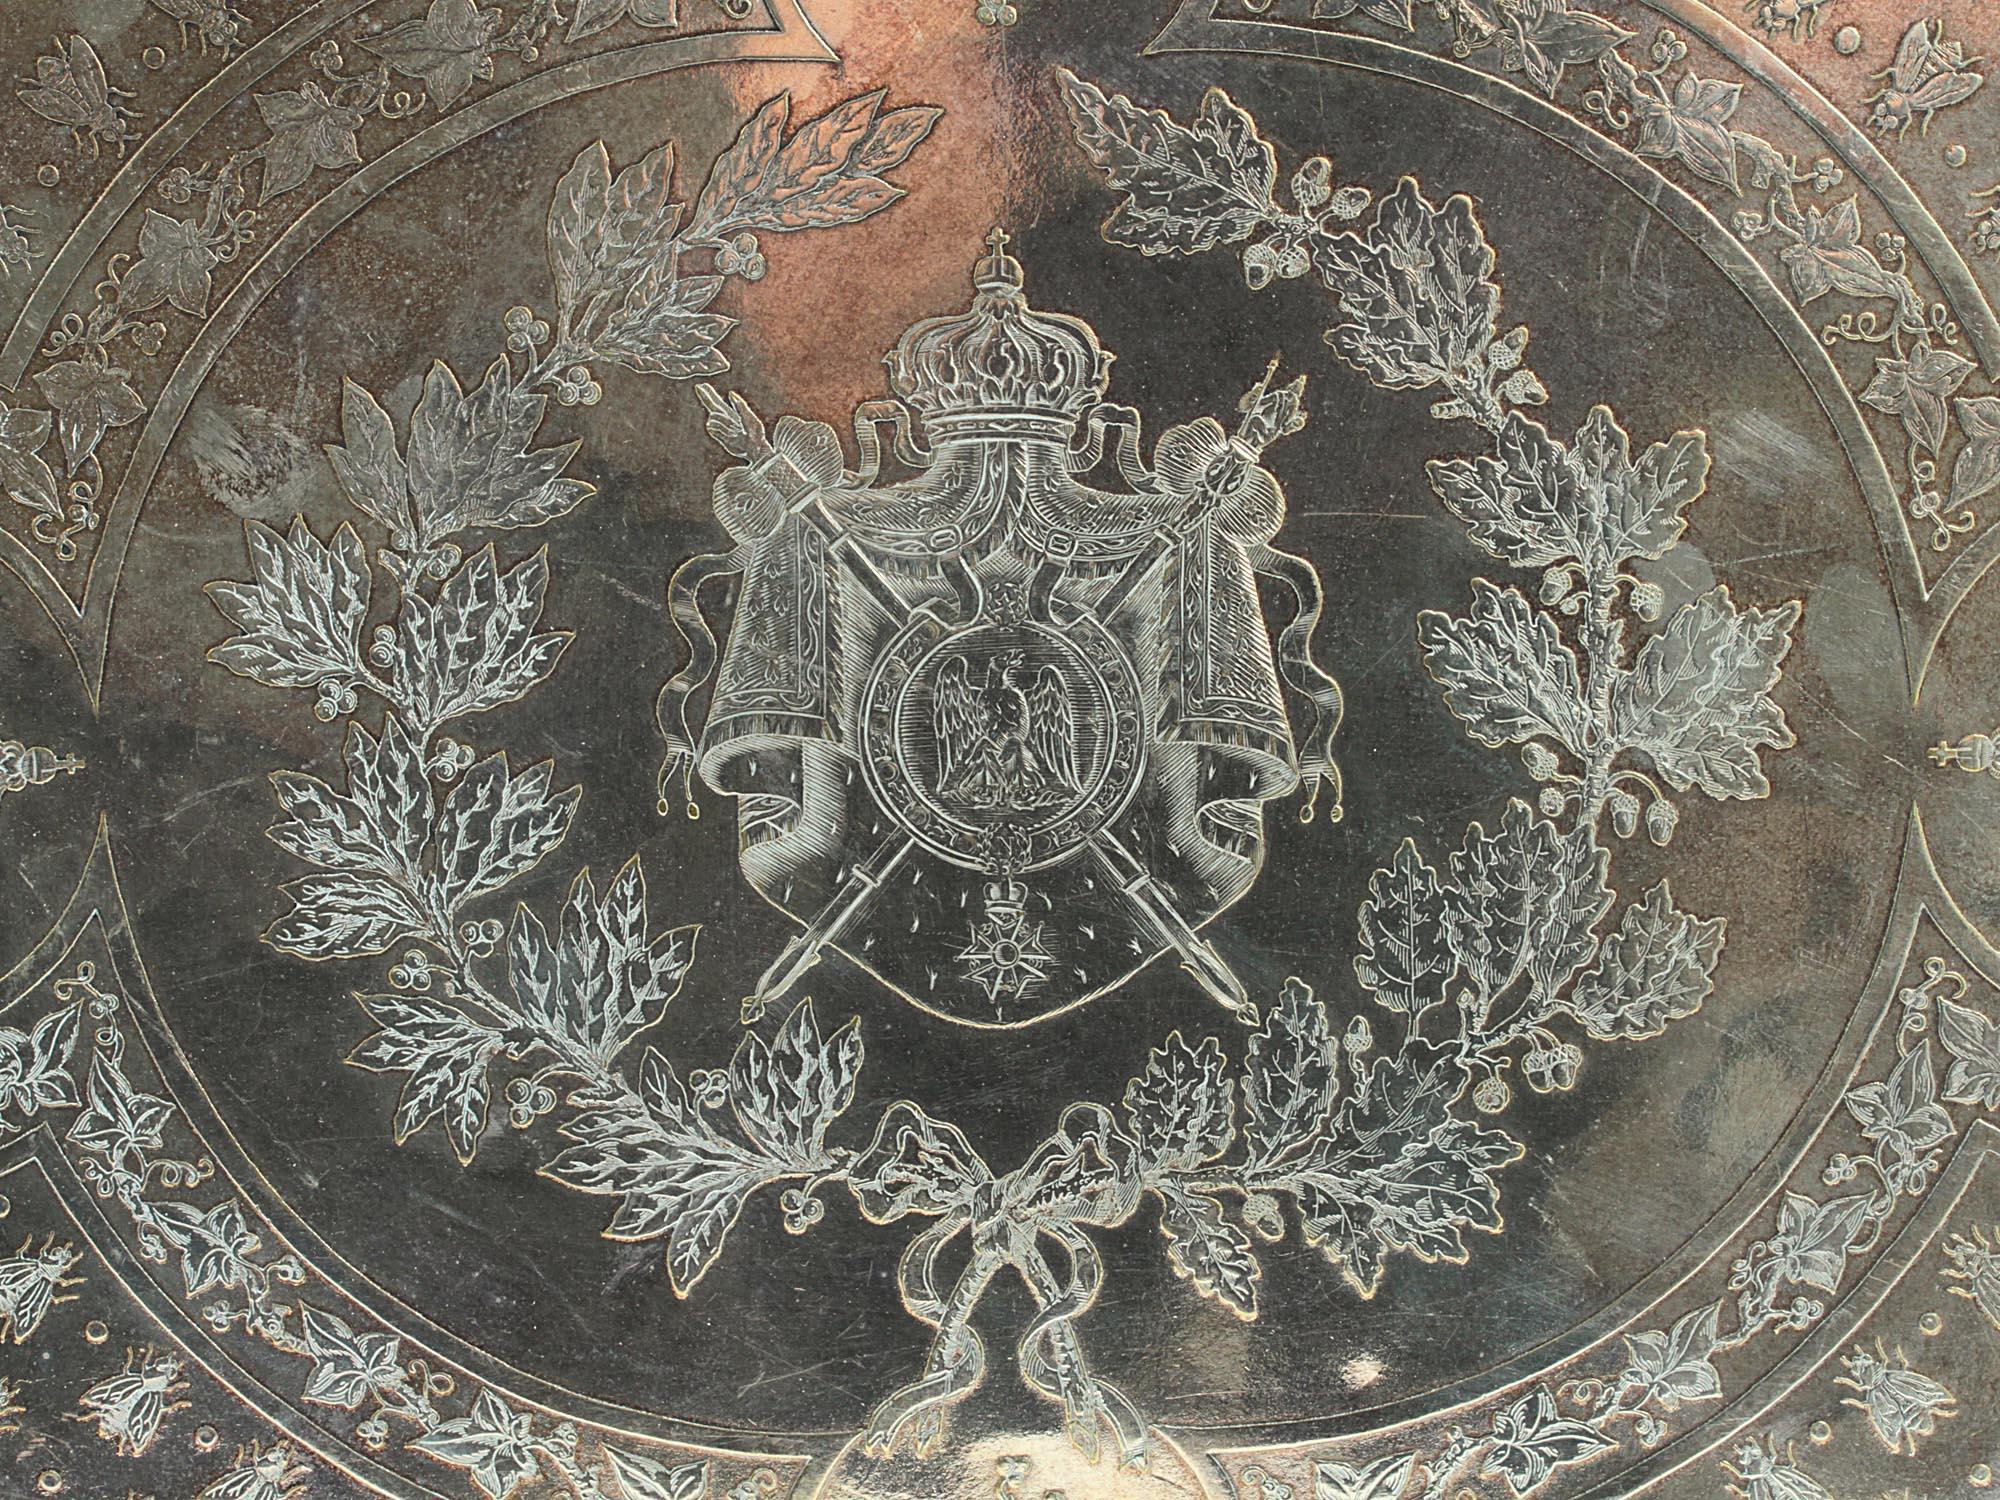 Our Christofle silverplated tray features fine engraved designs including the French coat-of-arms, and Napoleonic cipher and imperial bees. Reverse has the maker's mark in oval cartouche that begins and ends with the letters 